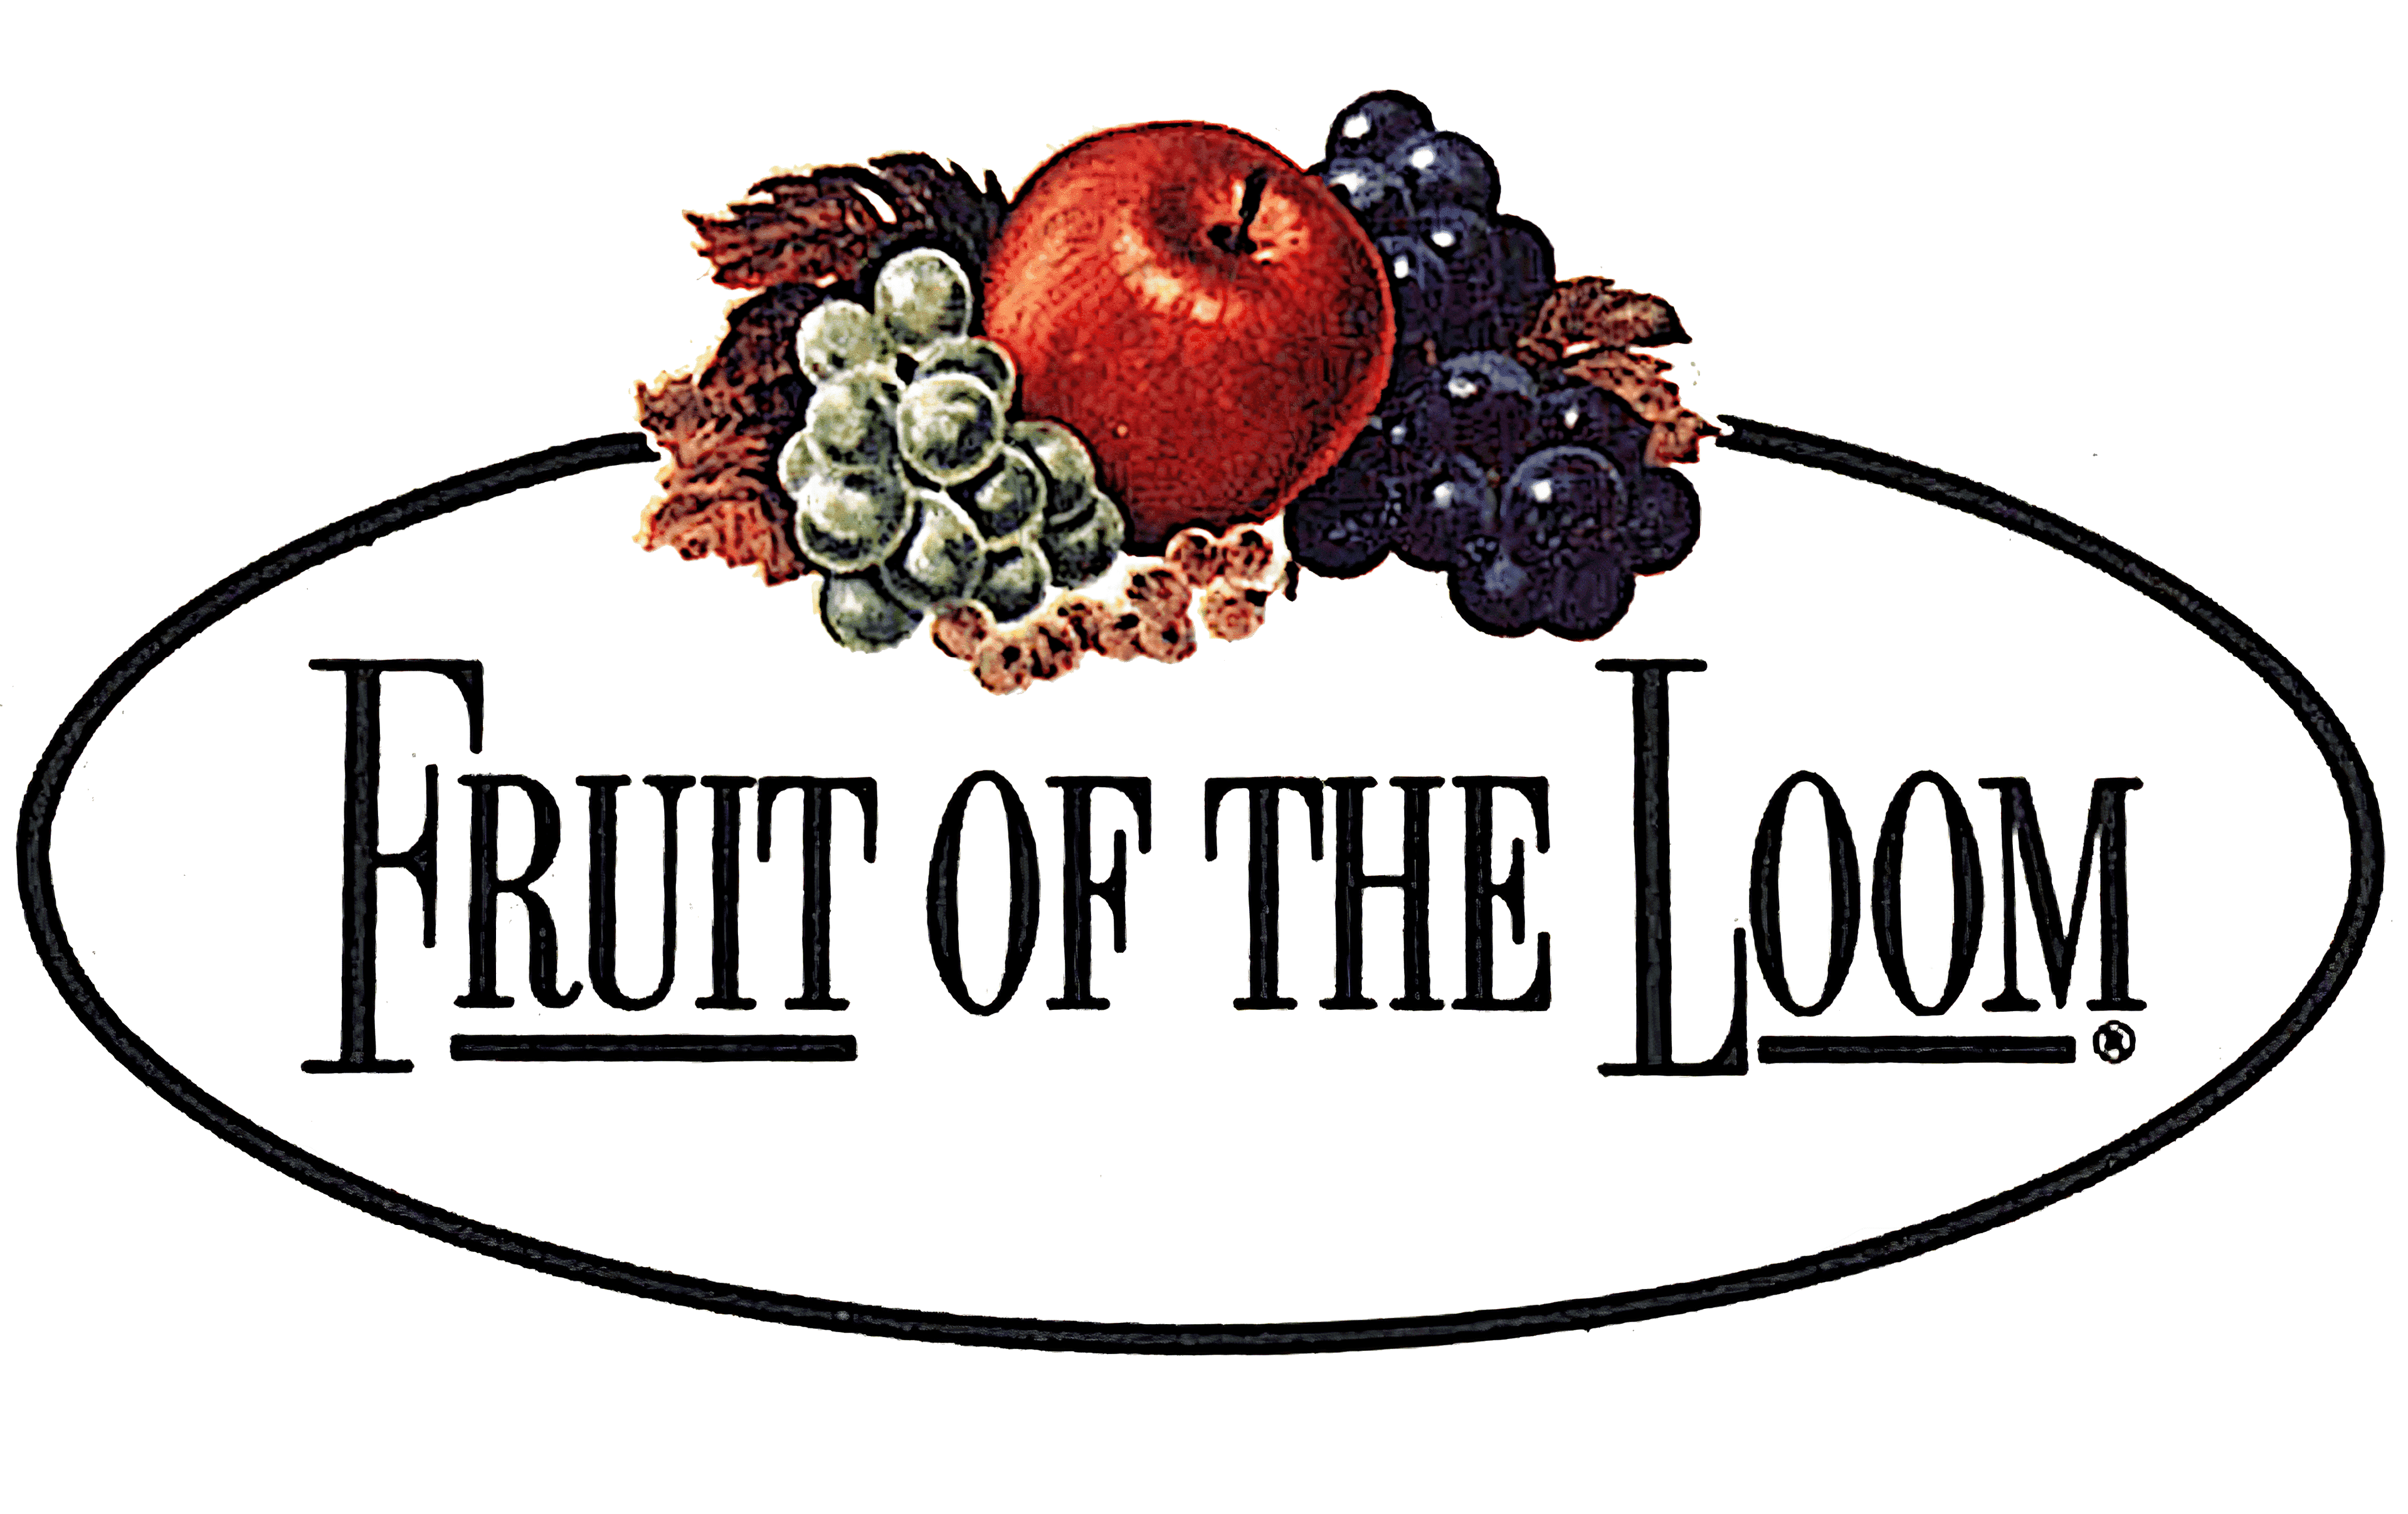 How Fruit of the Loom is refreshing its brand